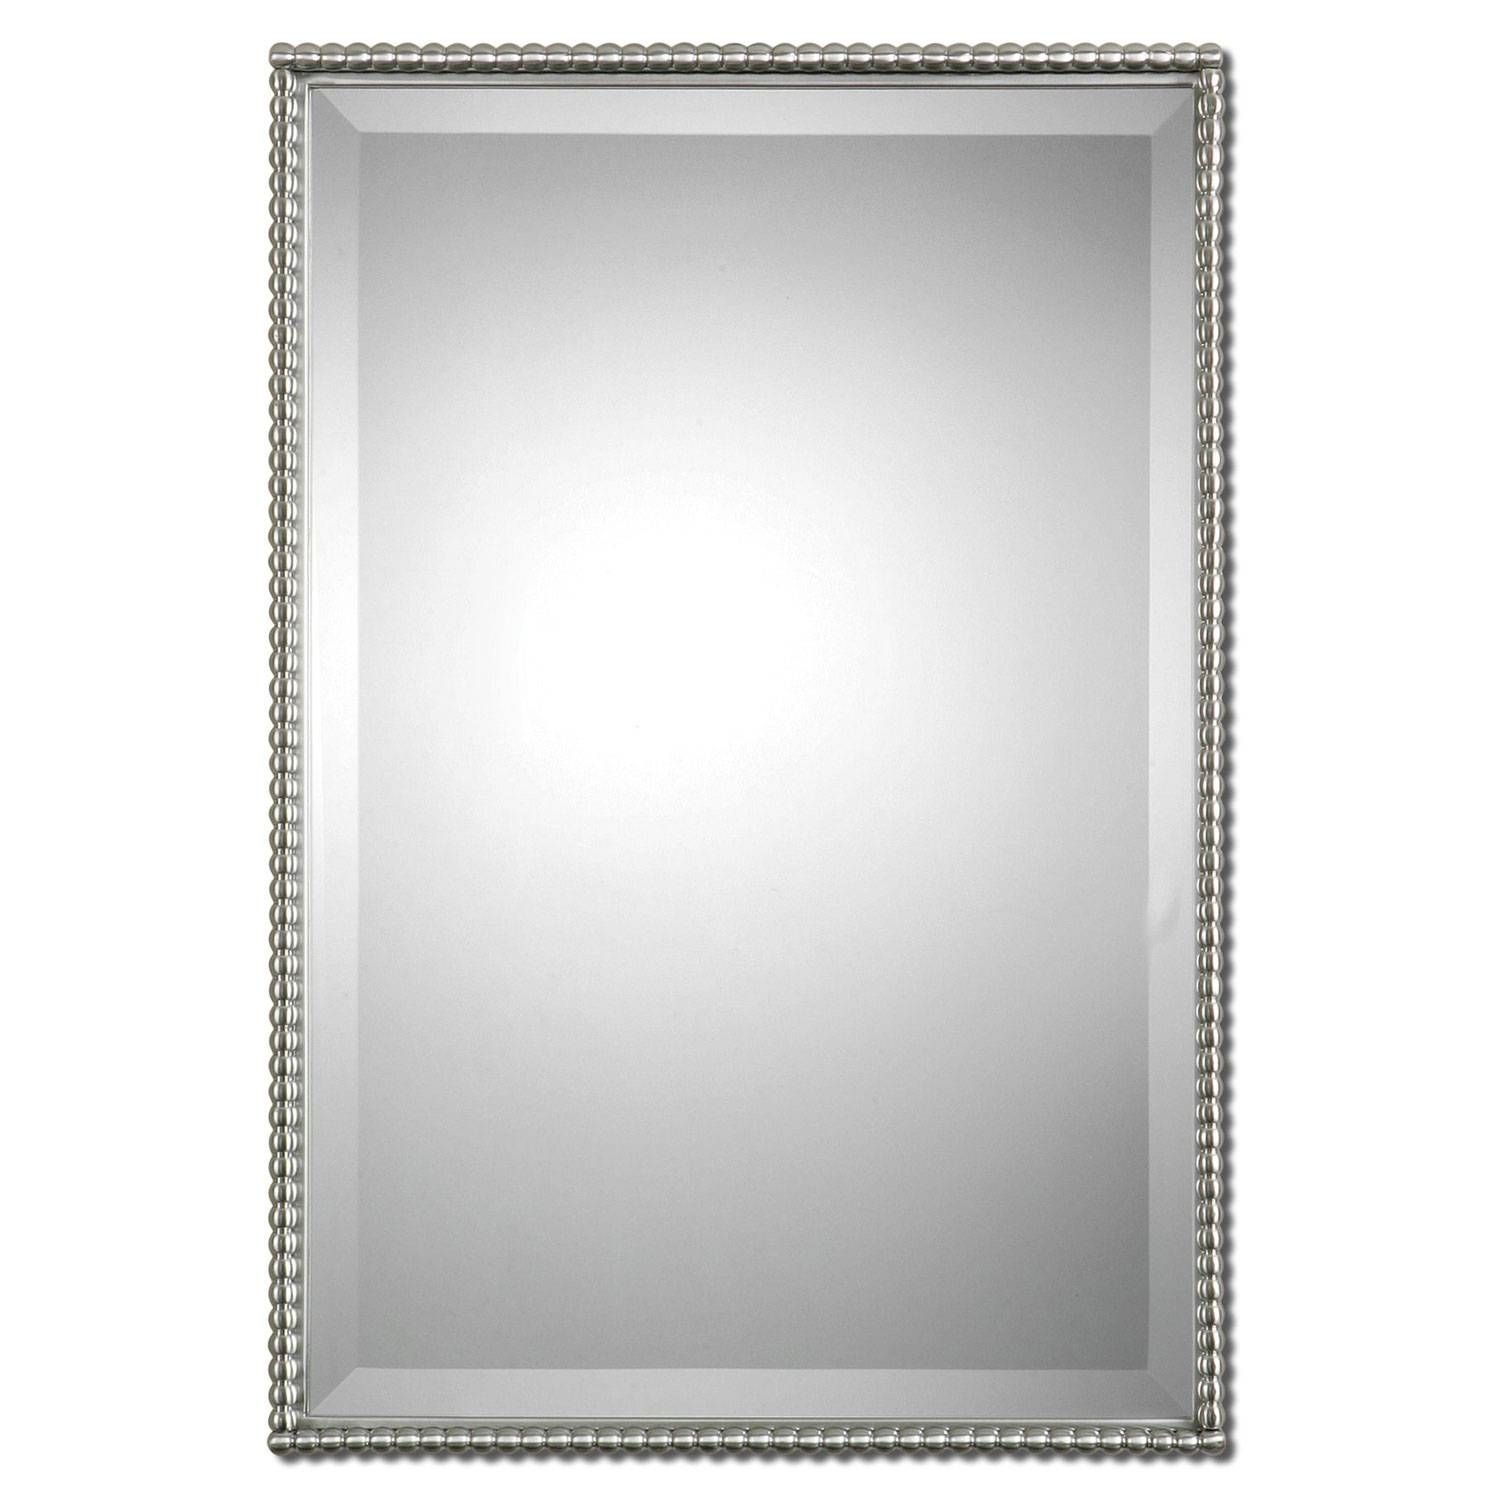 Brushed Nickel Sherise Rectangle Mirror Uttermost Wall Mirror Inside Mirrors Without Frames (View 22 of 25)